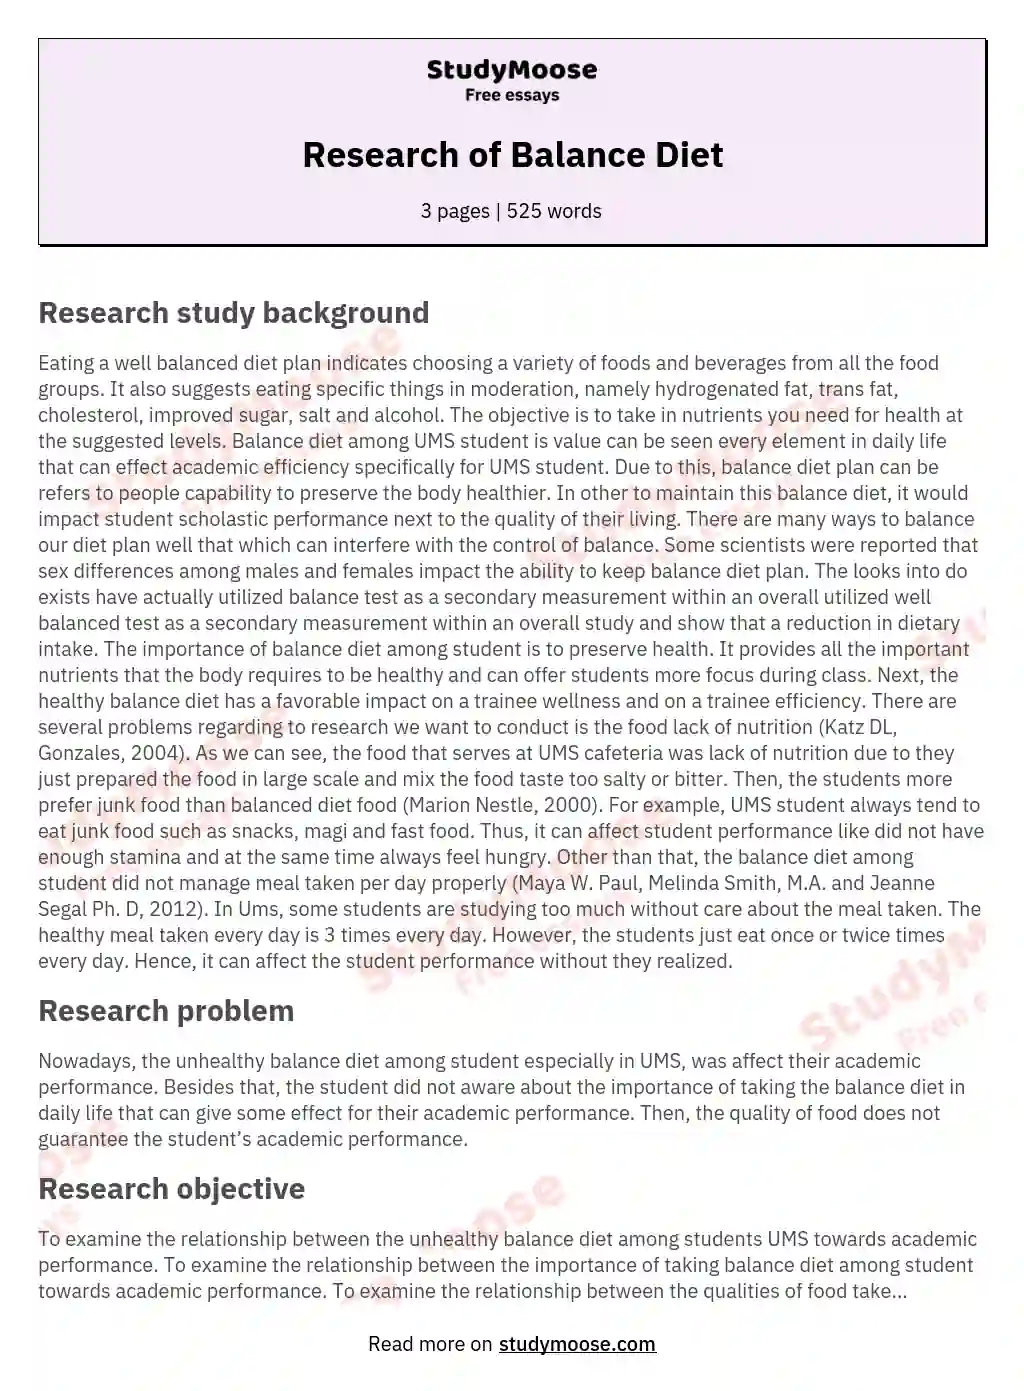 Research of Balance Diet essay